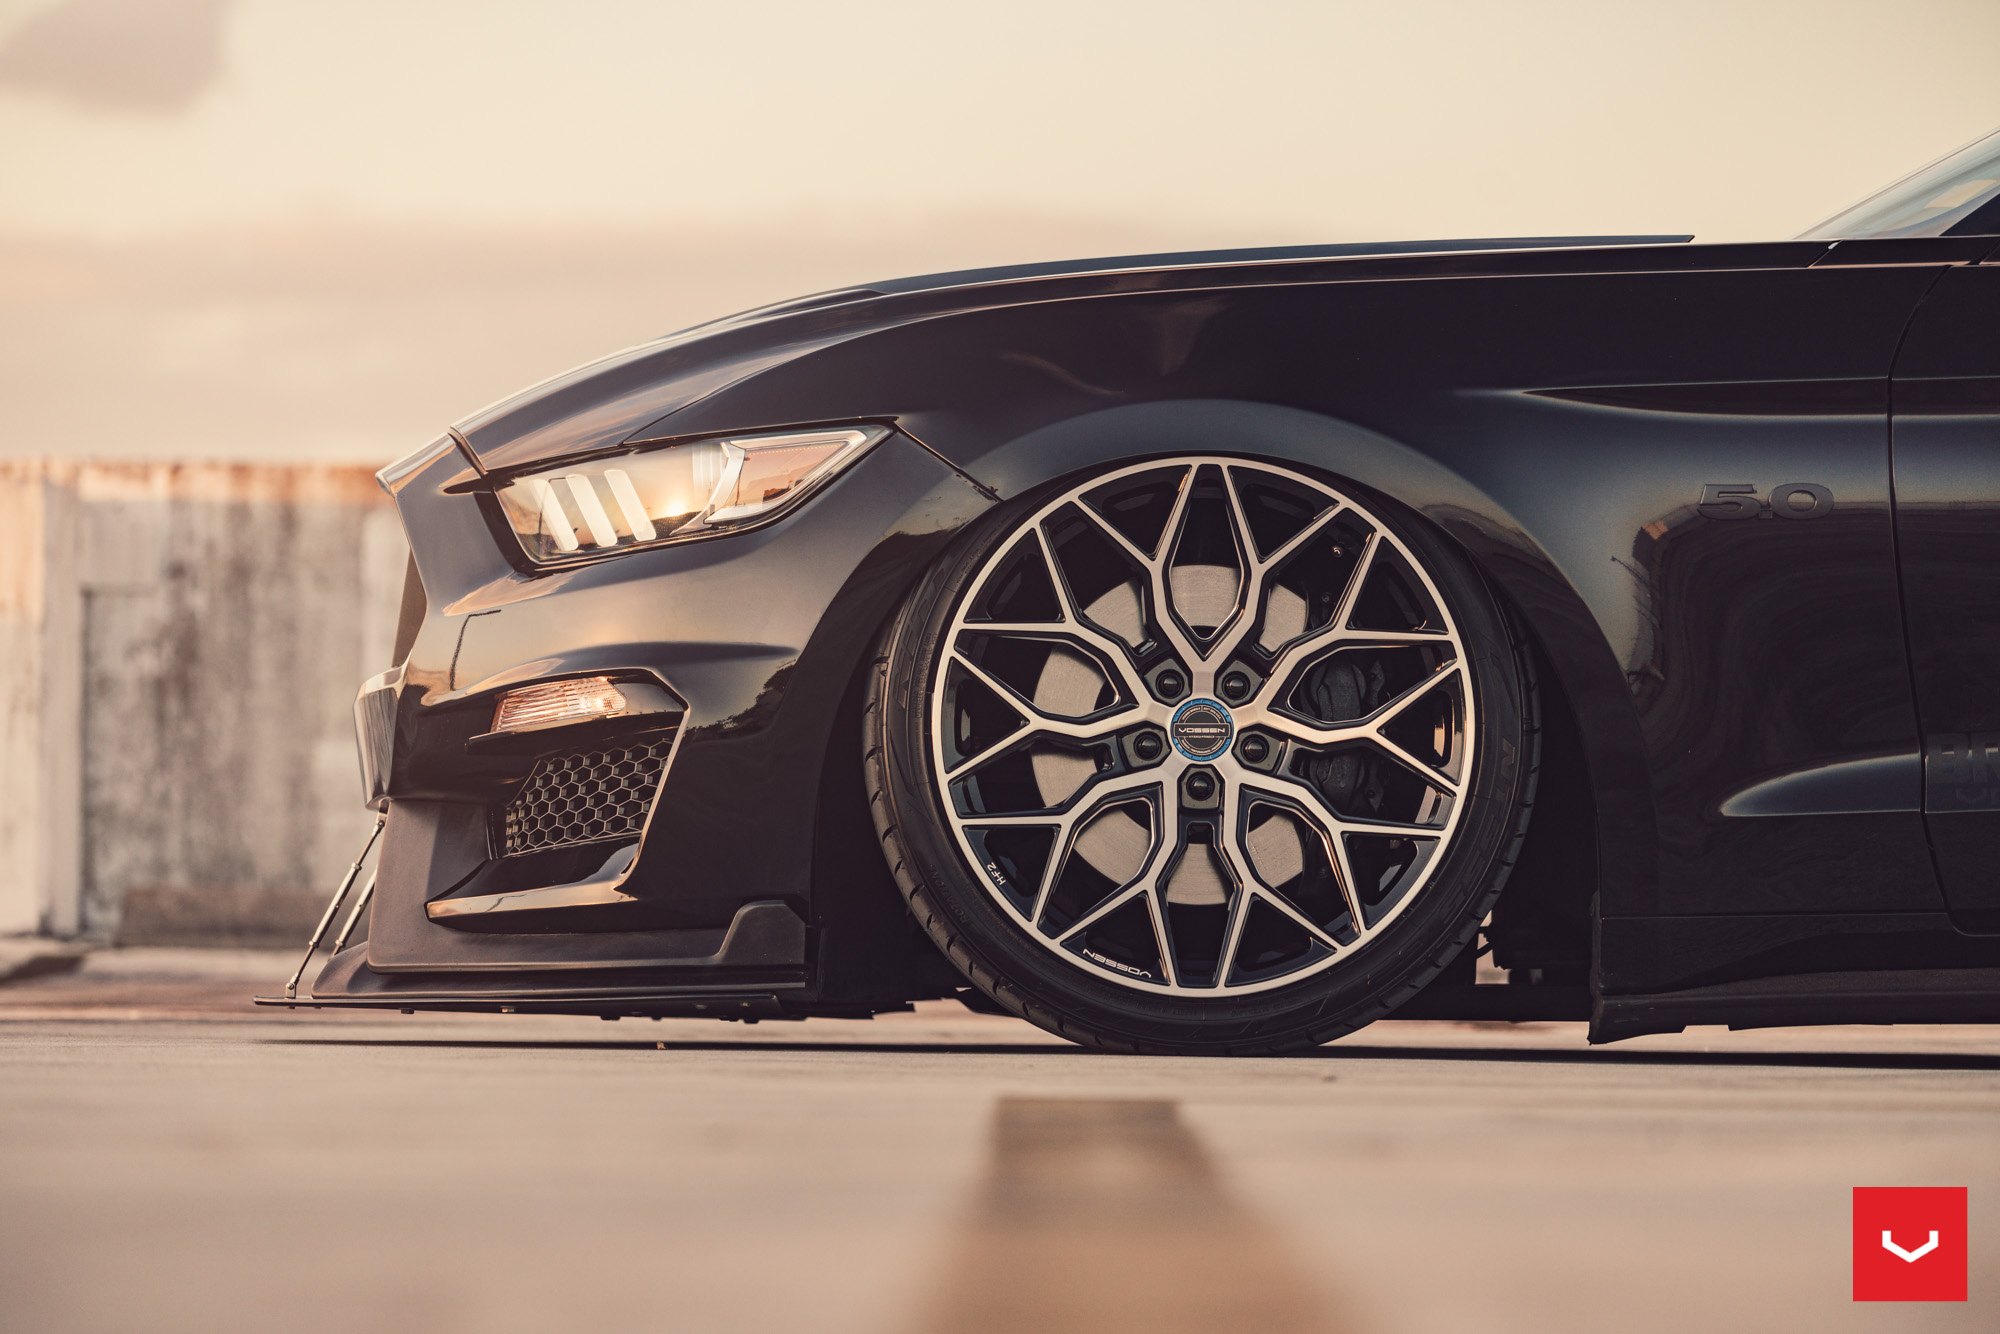 Vossen Forged Wheels on Black Ford Mustang - Photo by Vossen